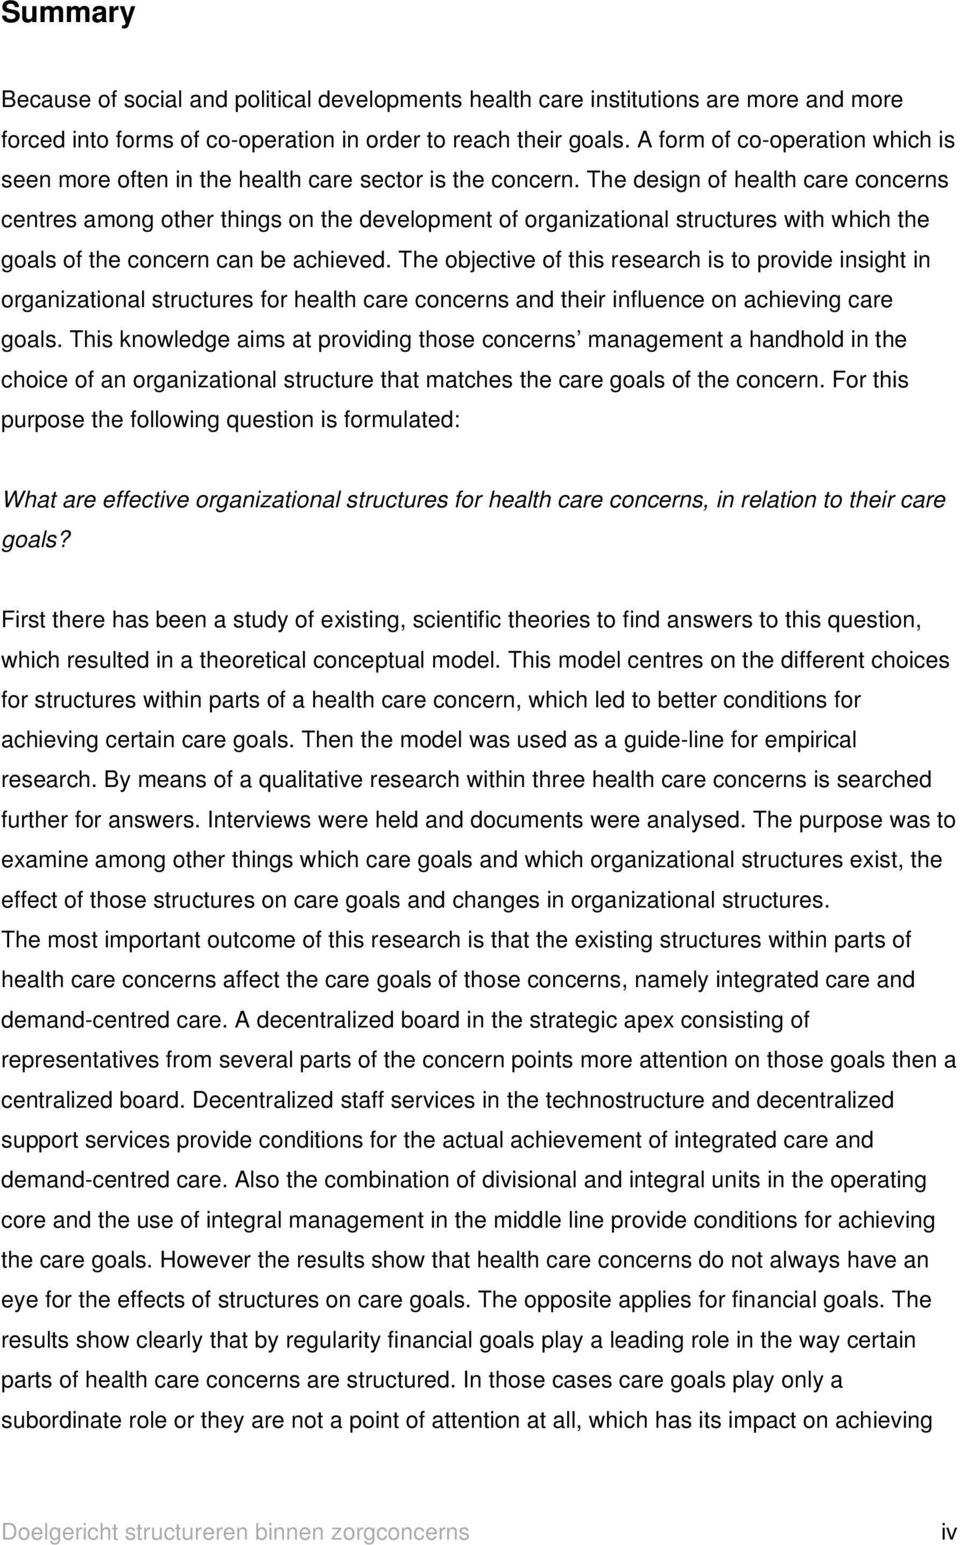 The design of health care concerns centres among other things on the development of organizational structures with which the goals of the concern can be achieved.